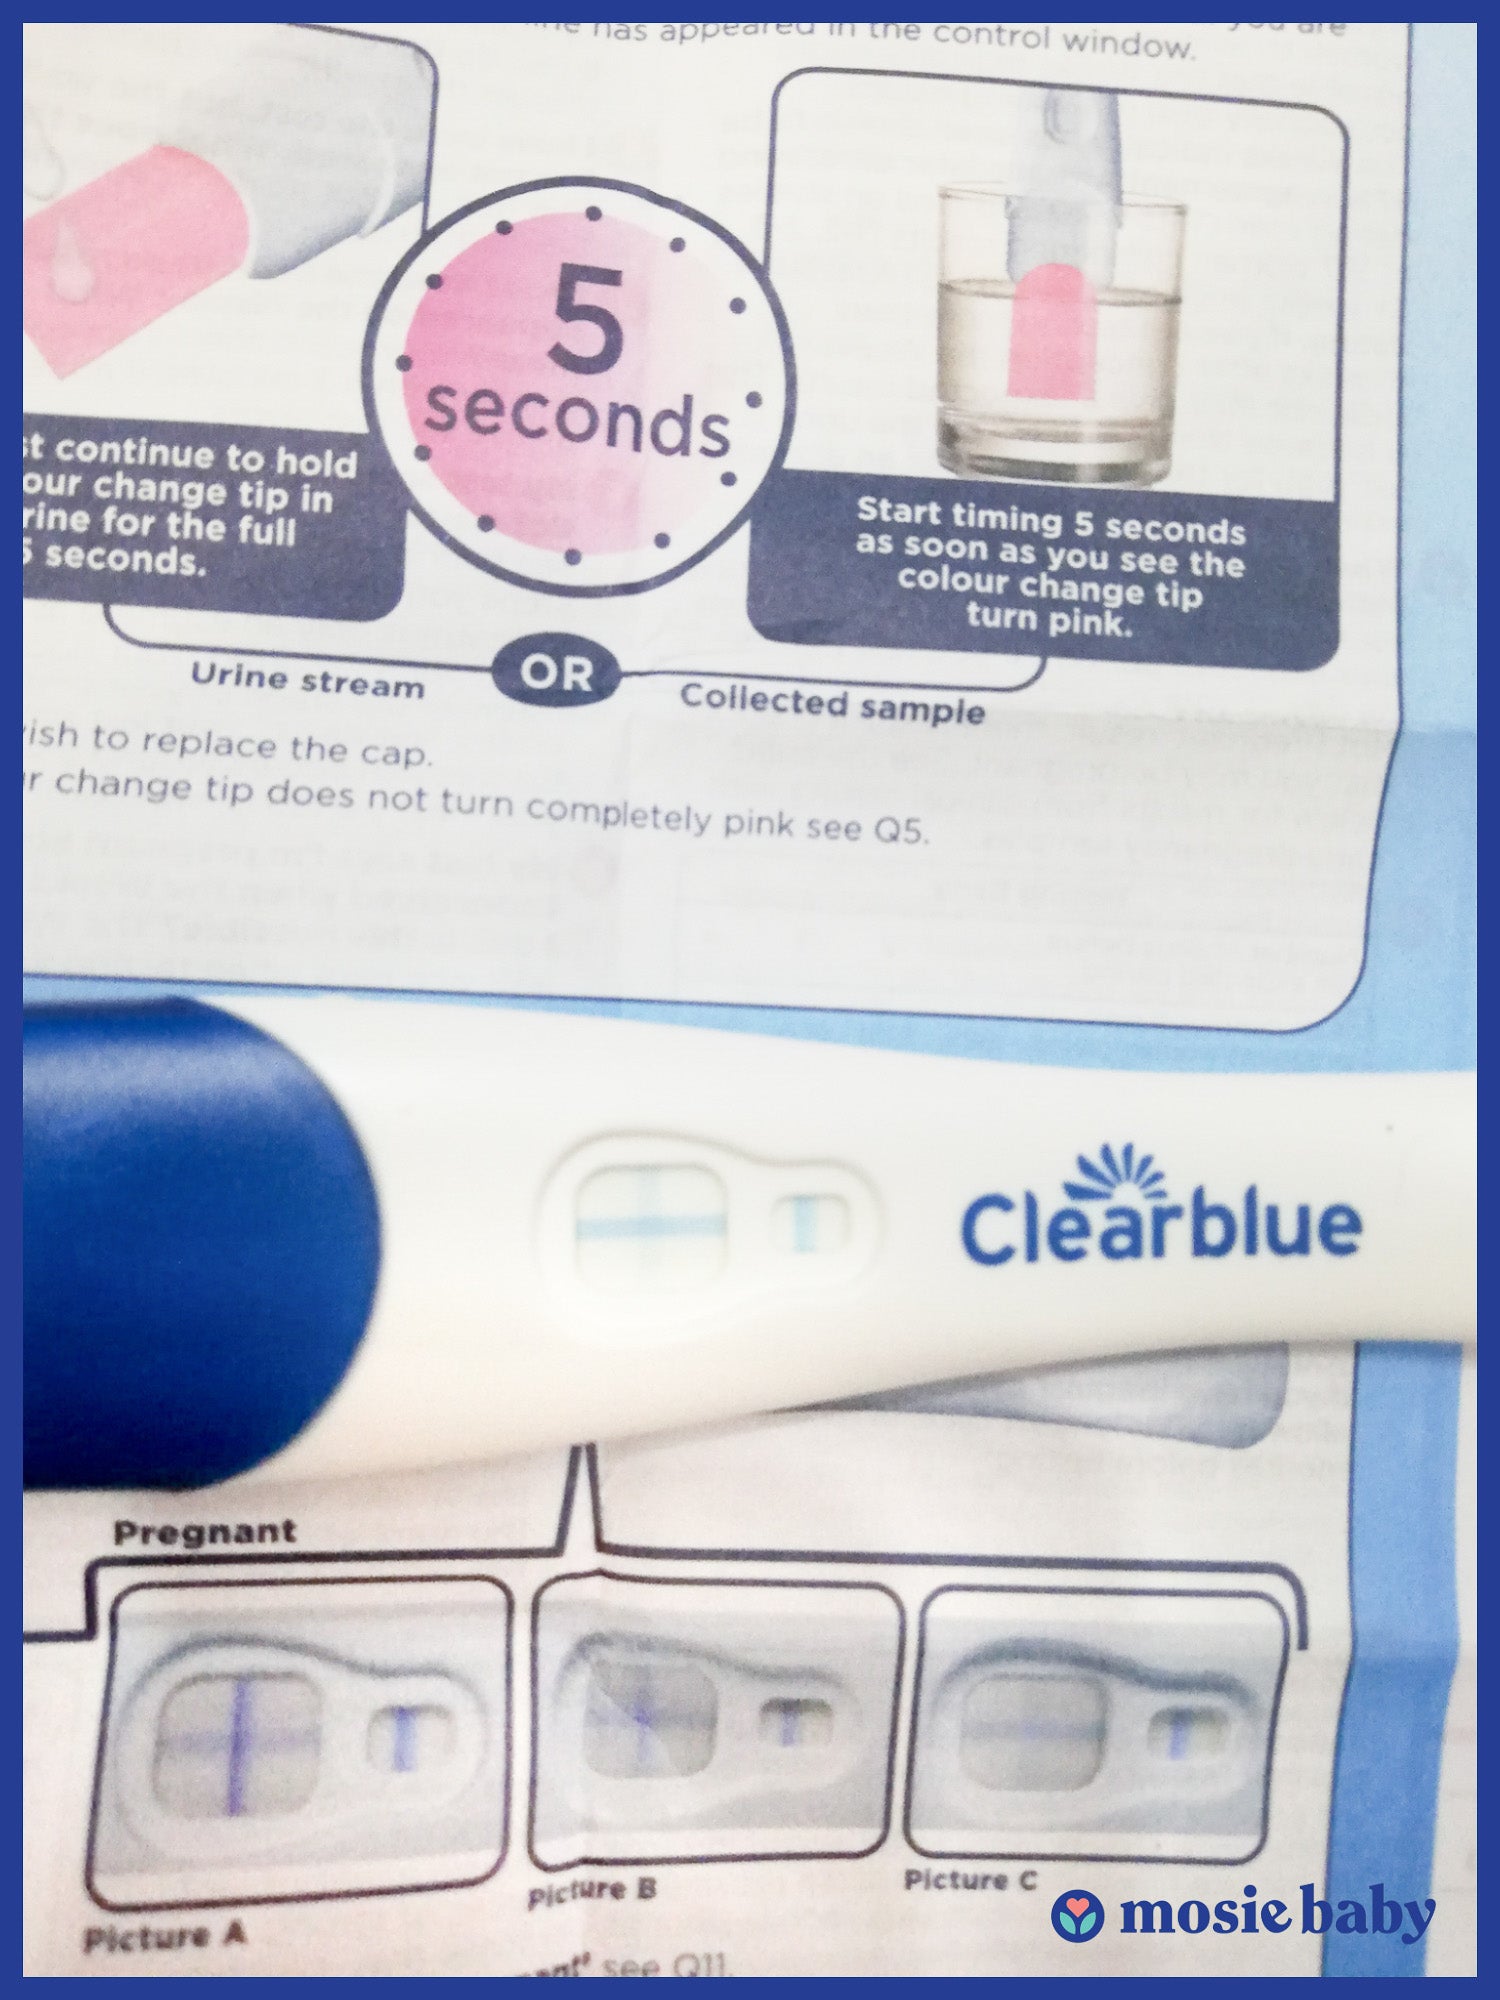 A positive pregnancy test from a Mosie user